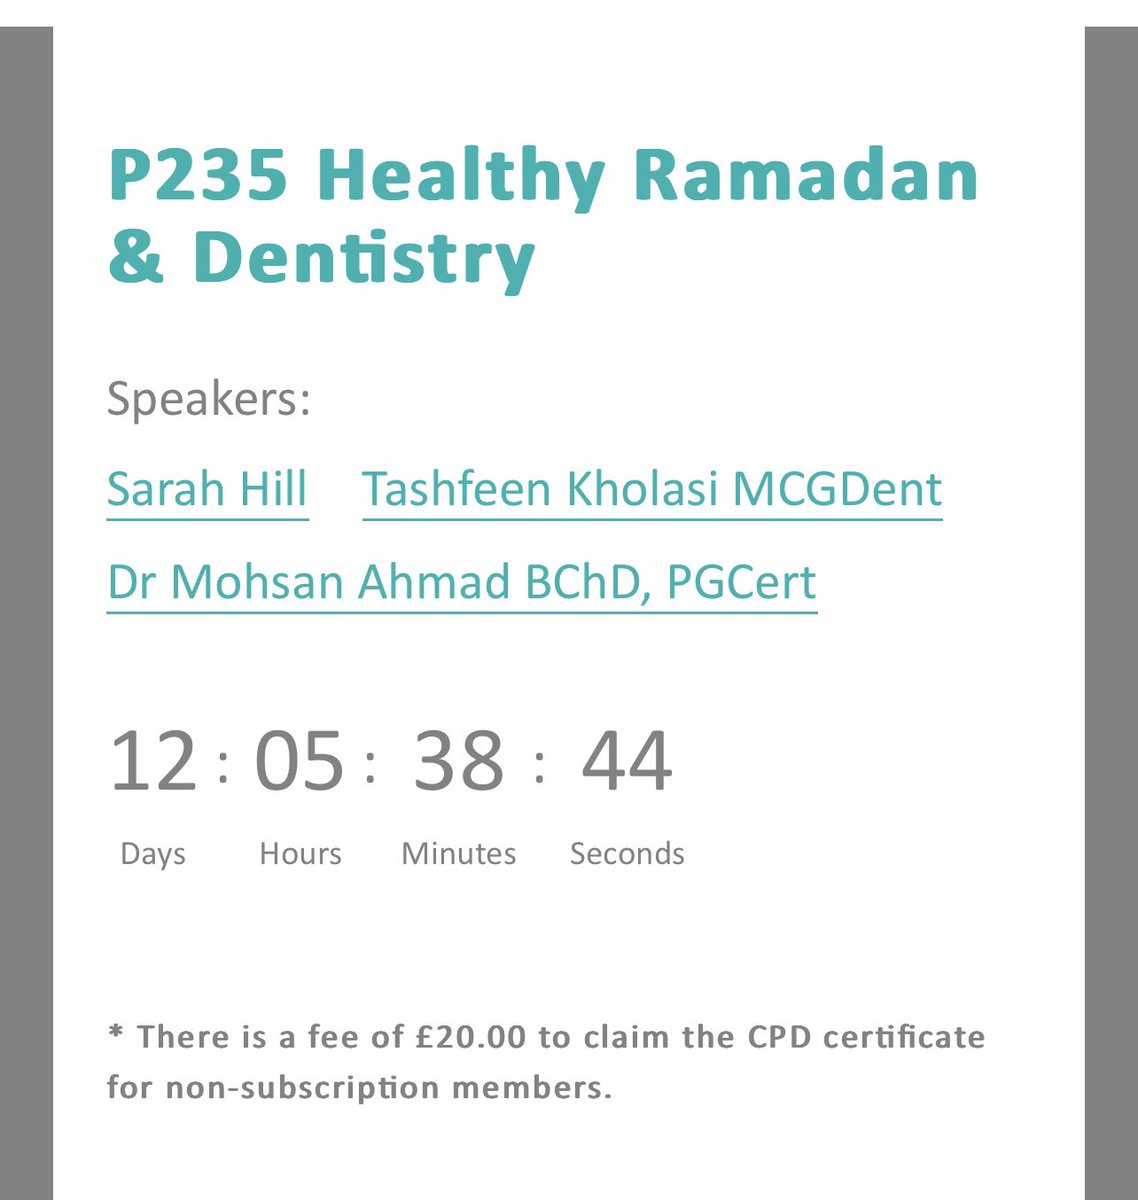 Join us for a Free Webinar on Healthy Ramadan and Dentistry, supported by @ProDentalCPD Mon 20 March 7pm @digitaldentis #teeth #dental #Ramadan